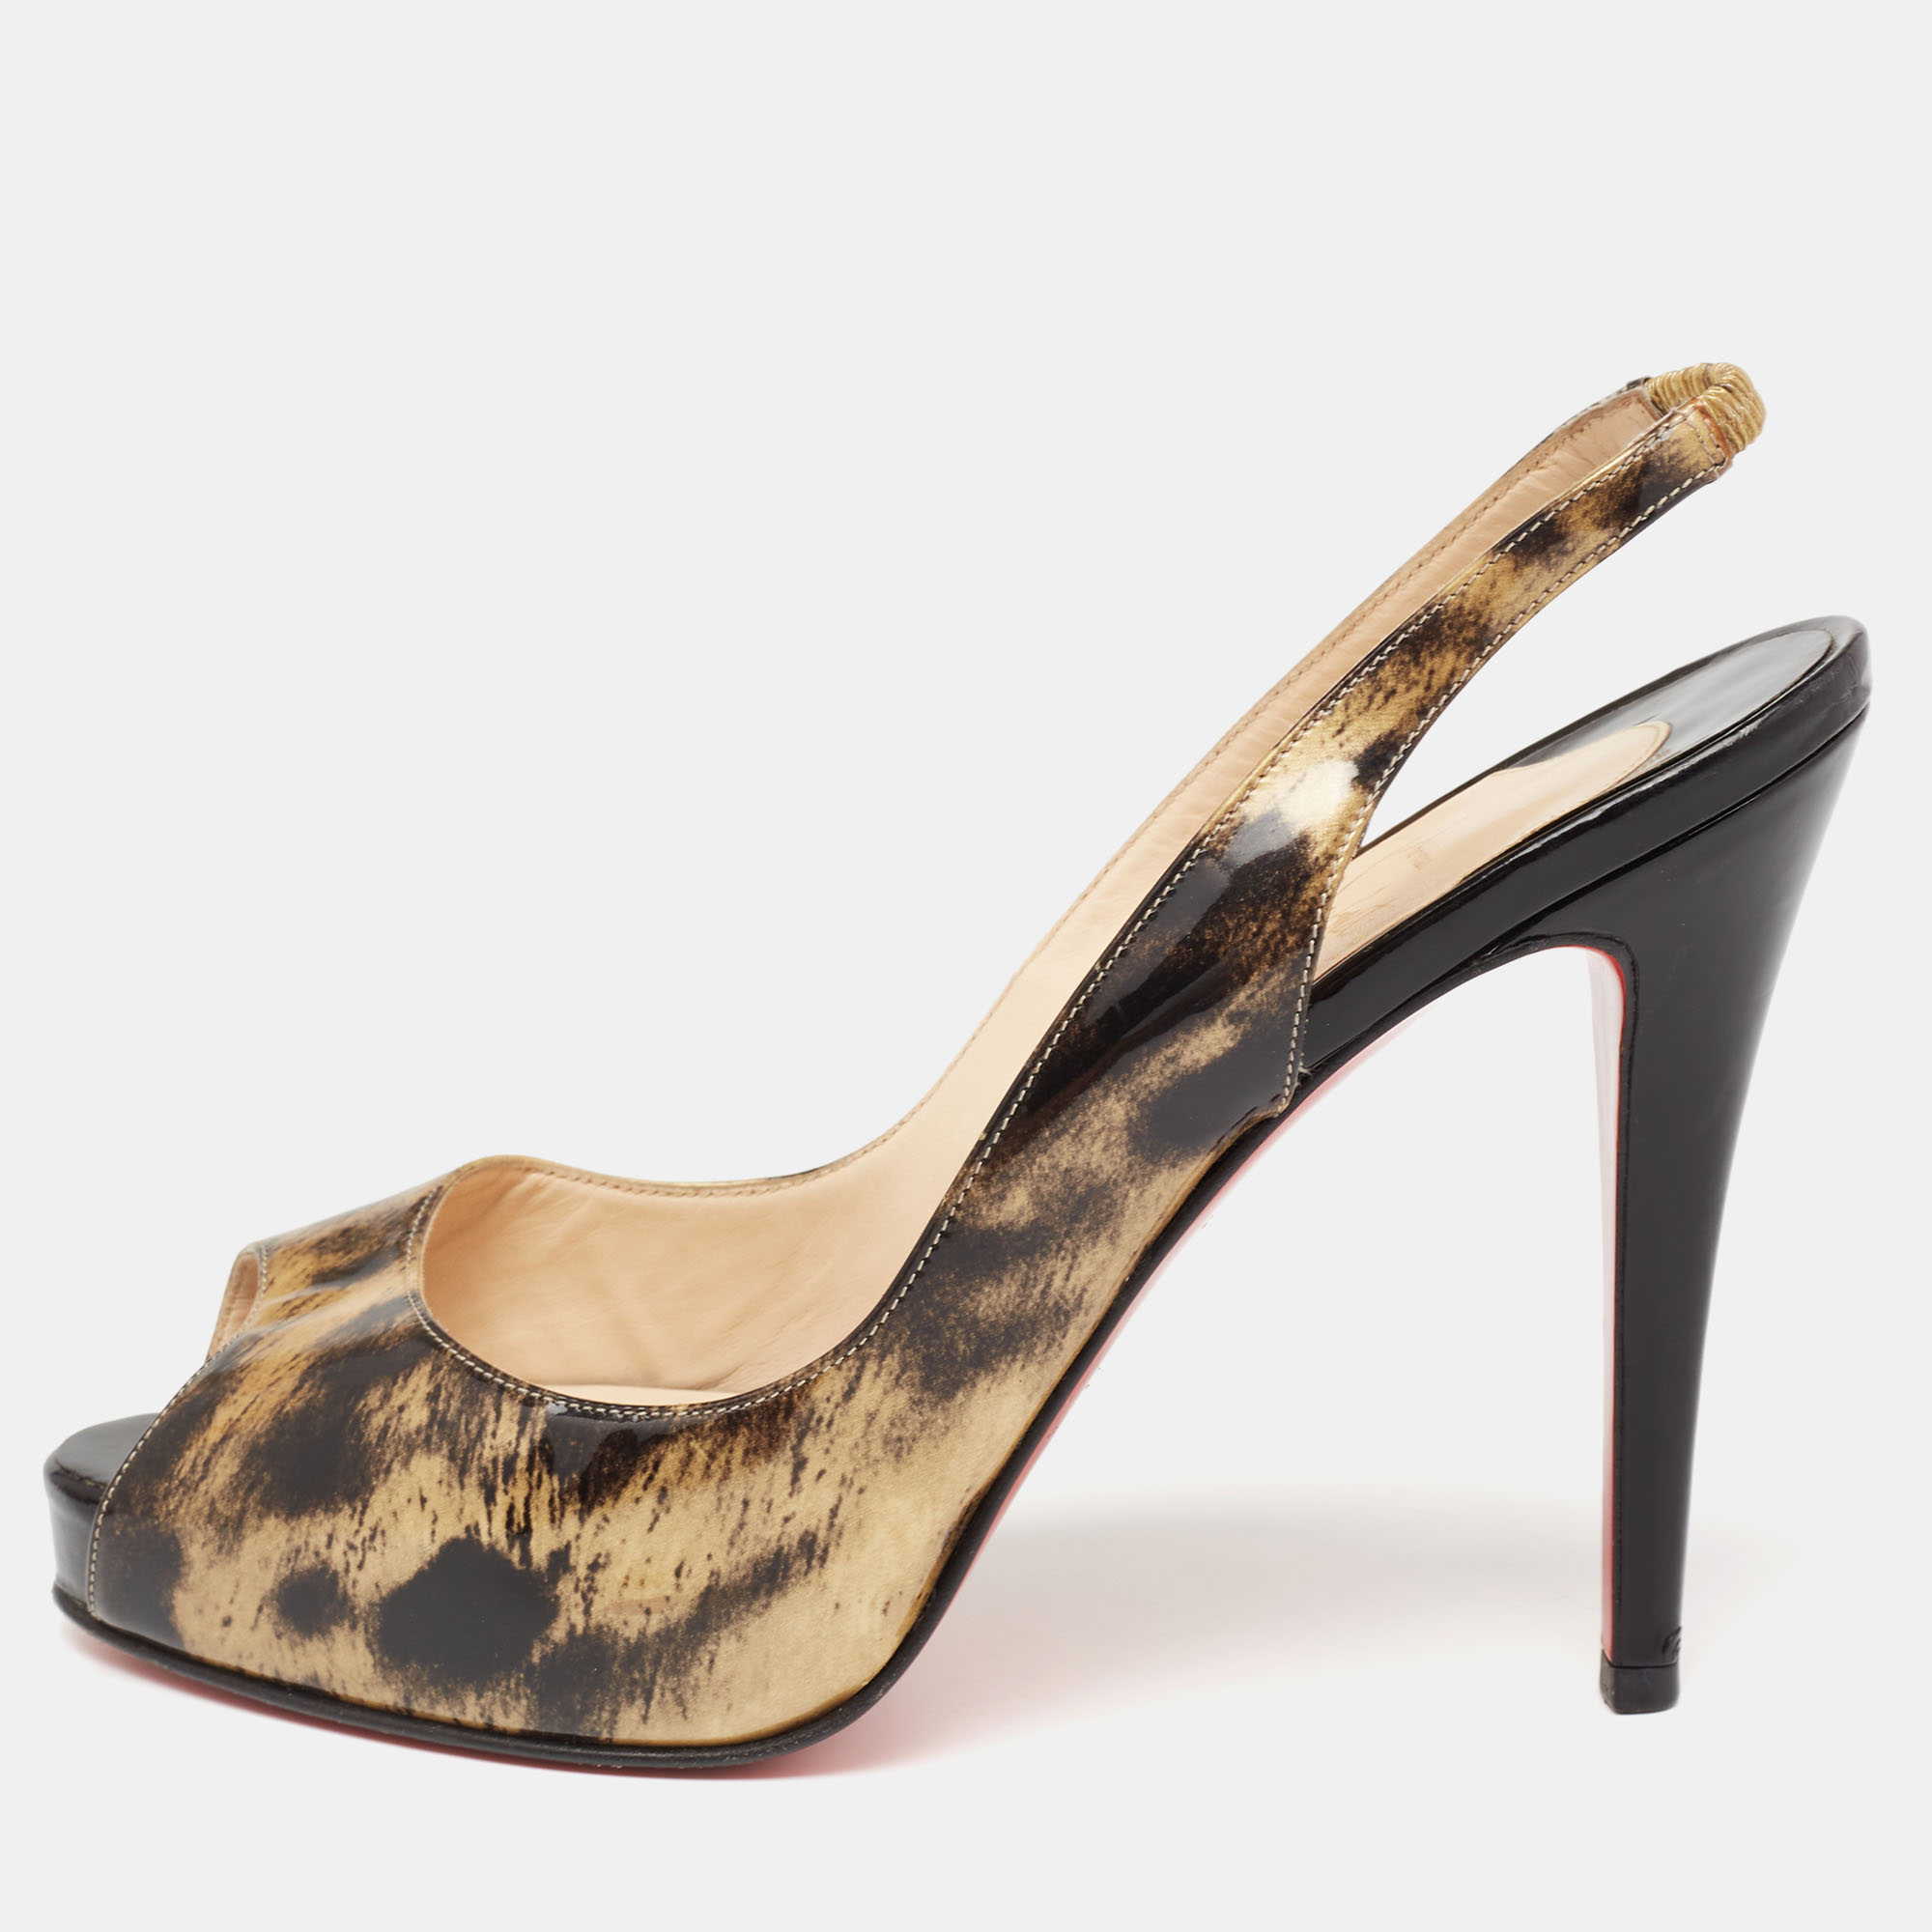 Pre-owned Christian Louboutin Black/gold Printed Patent Leather No Prive Slingback Sandals Size 38